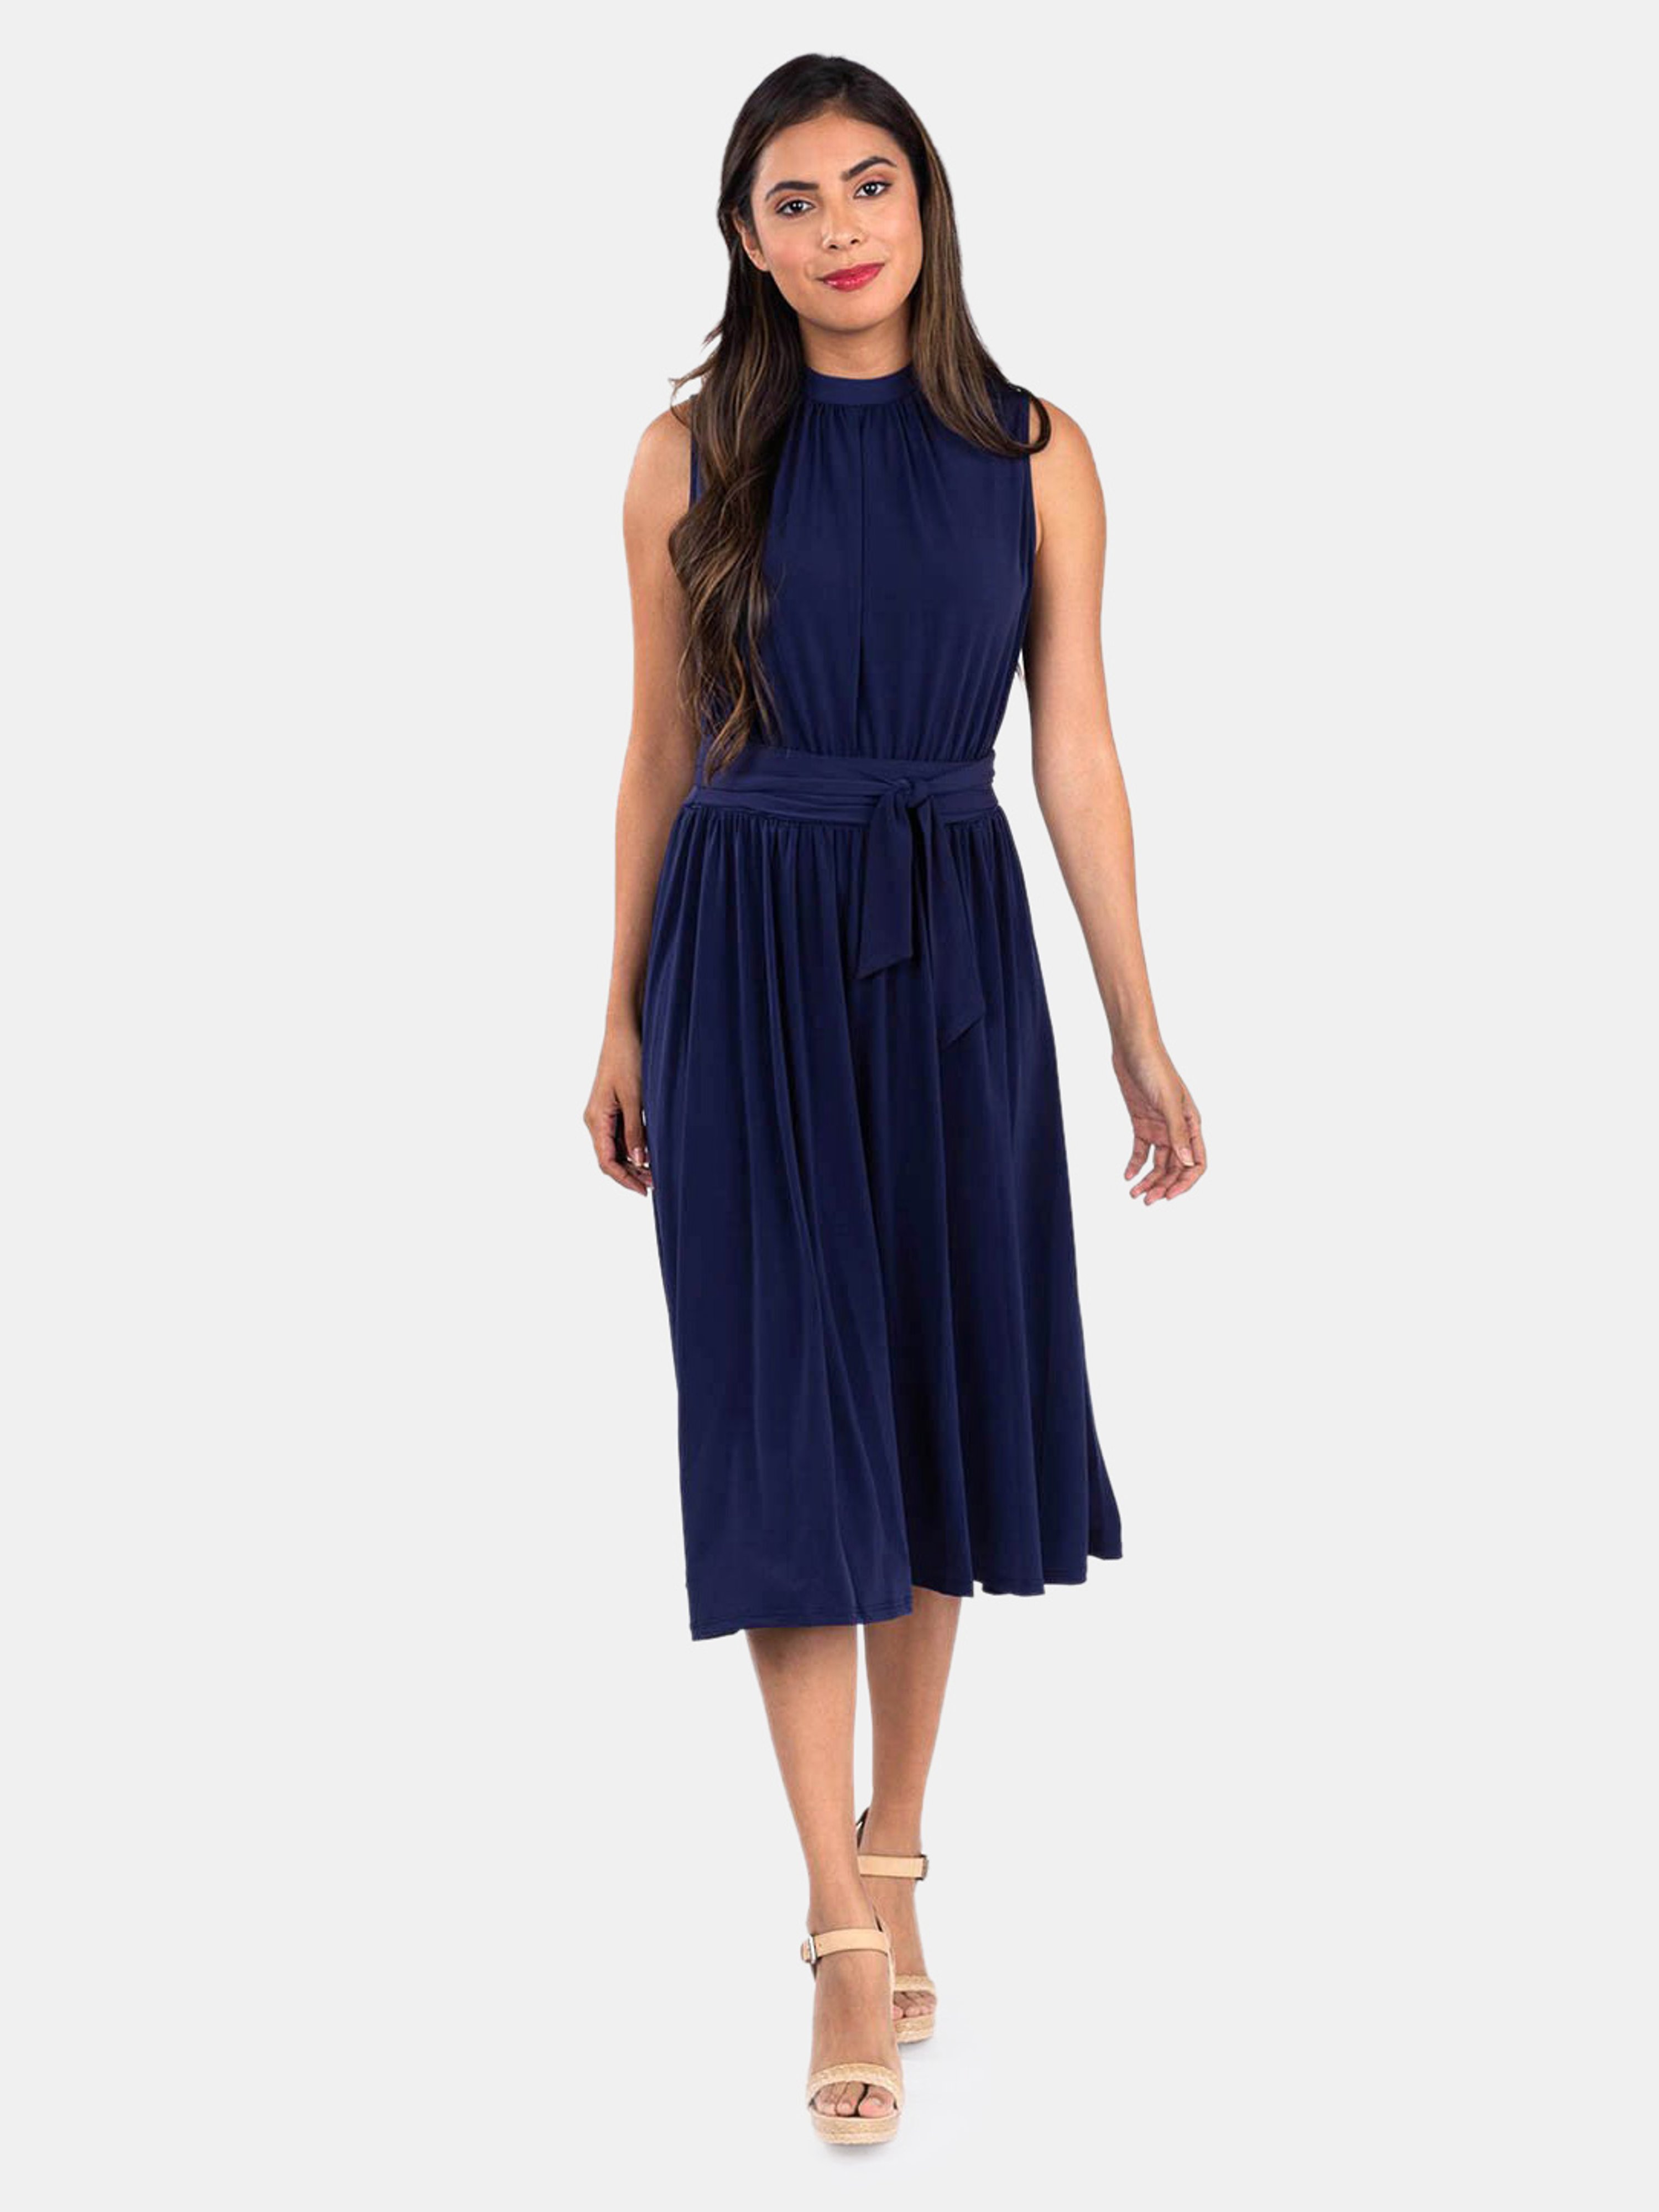 Leota Mindy Shirred Dress In Classic Navy In Blue